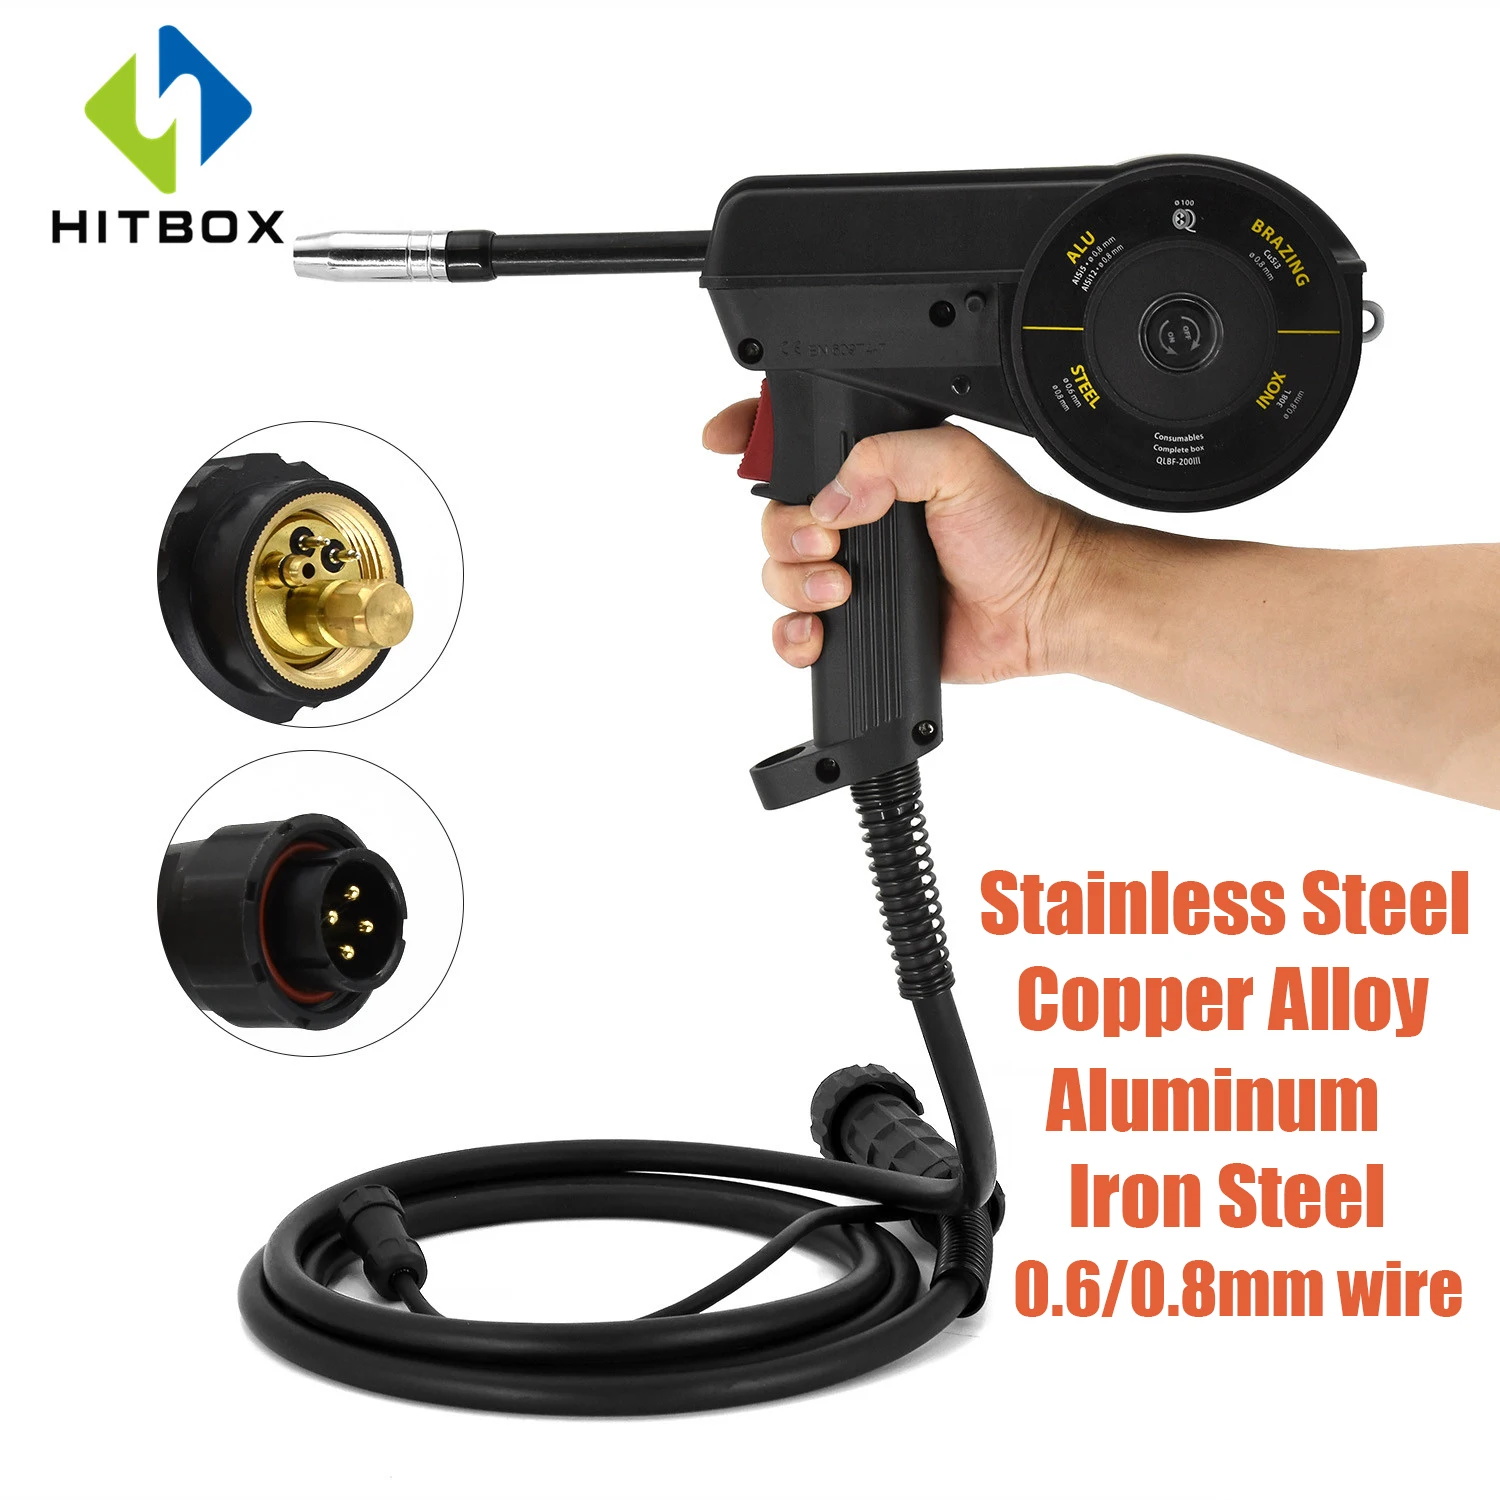 

HITBOX Spool Gun Mig Torch 3 Meters Aluminum Stainless Steel Iron Spool 4 Cores Adapter Torch For Professional Welder